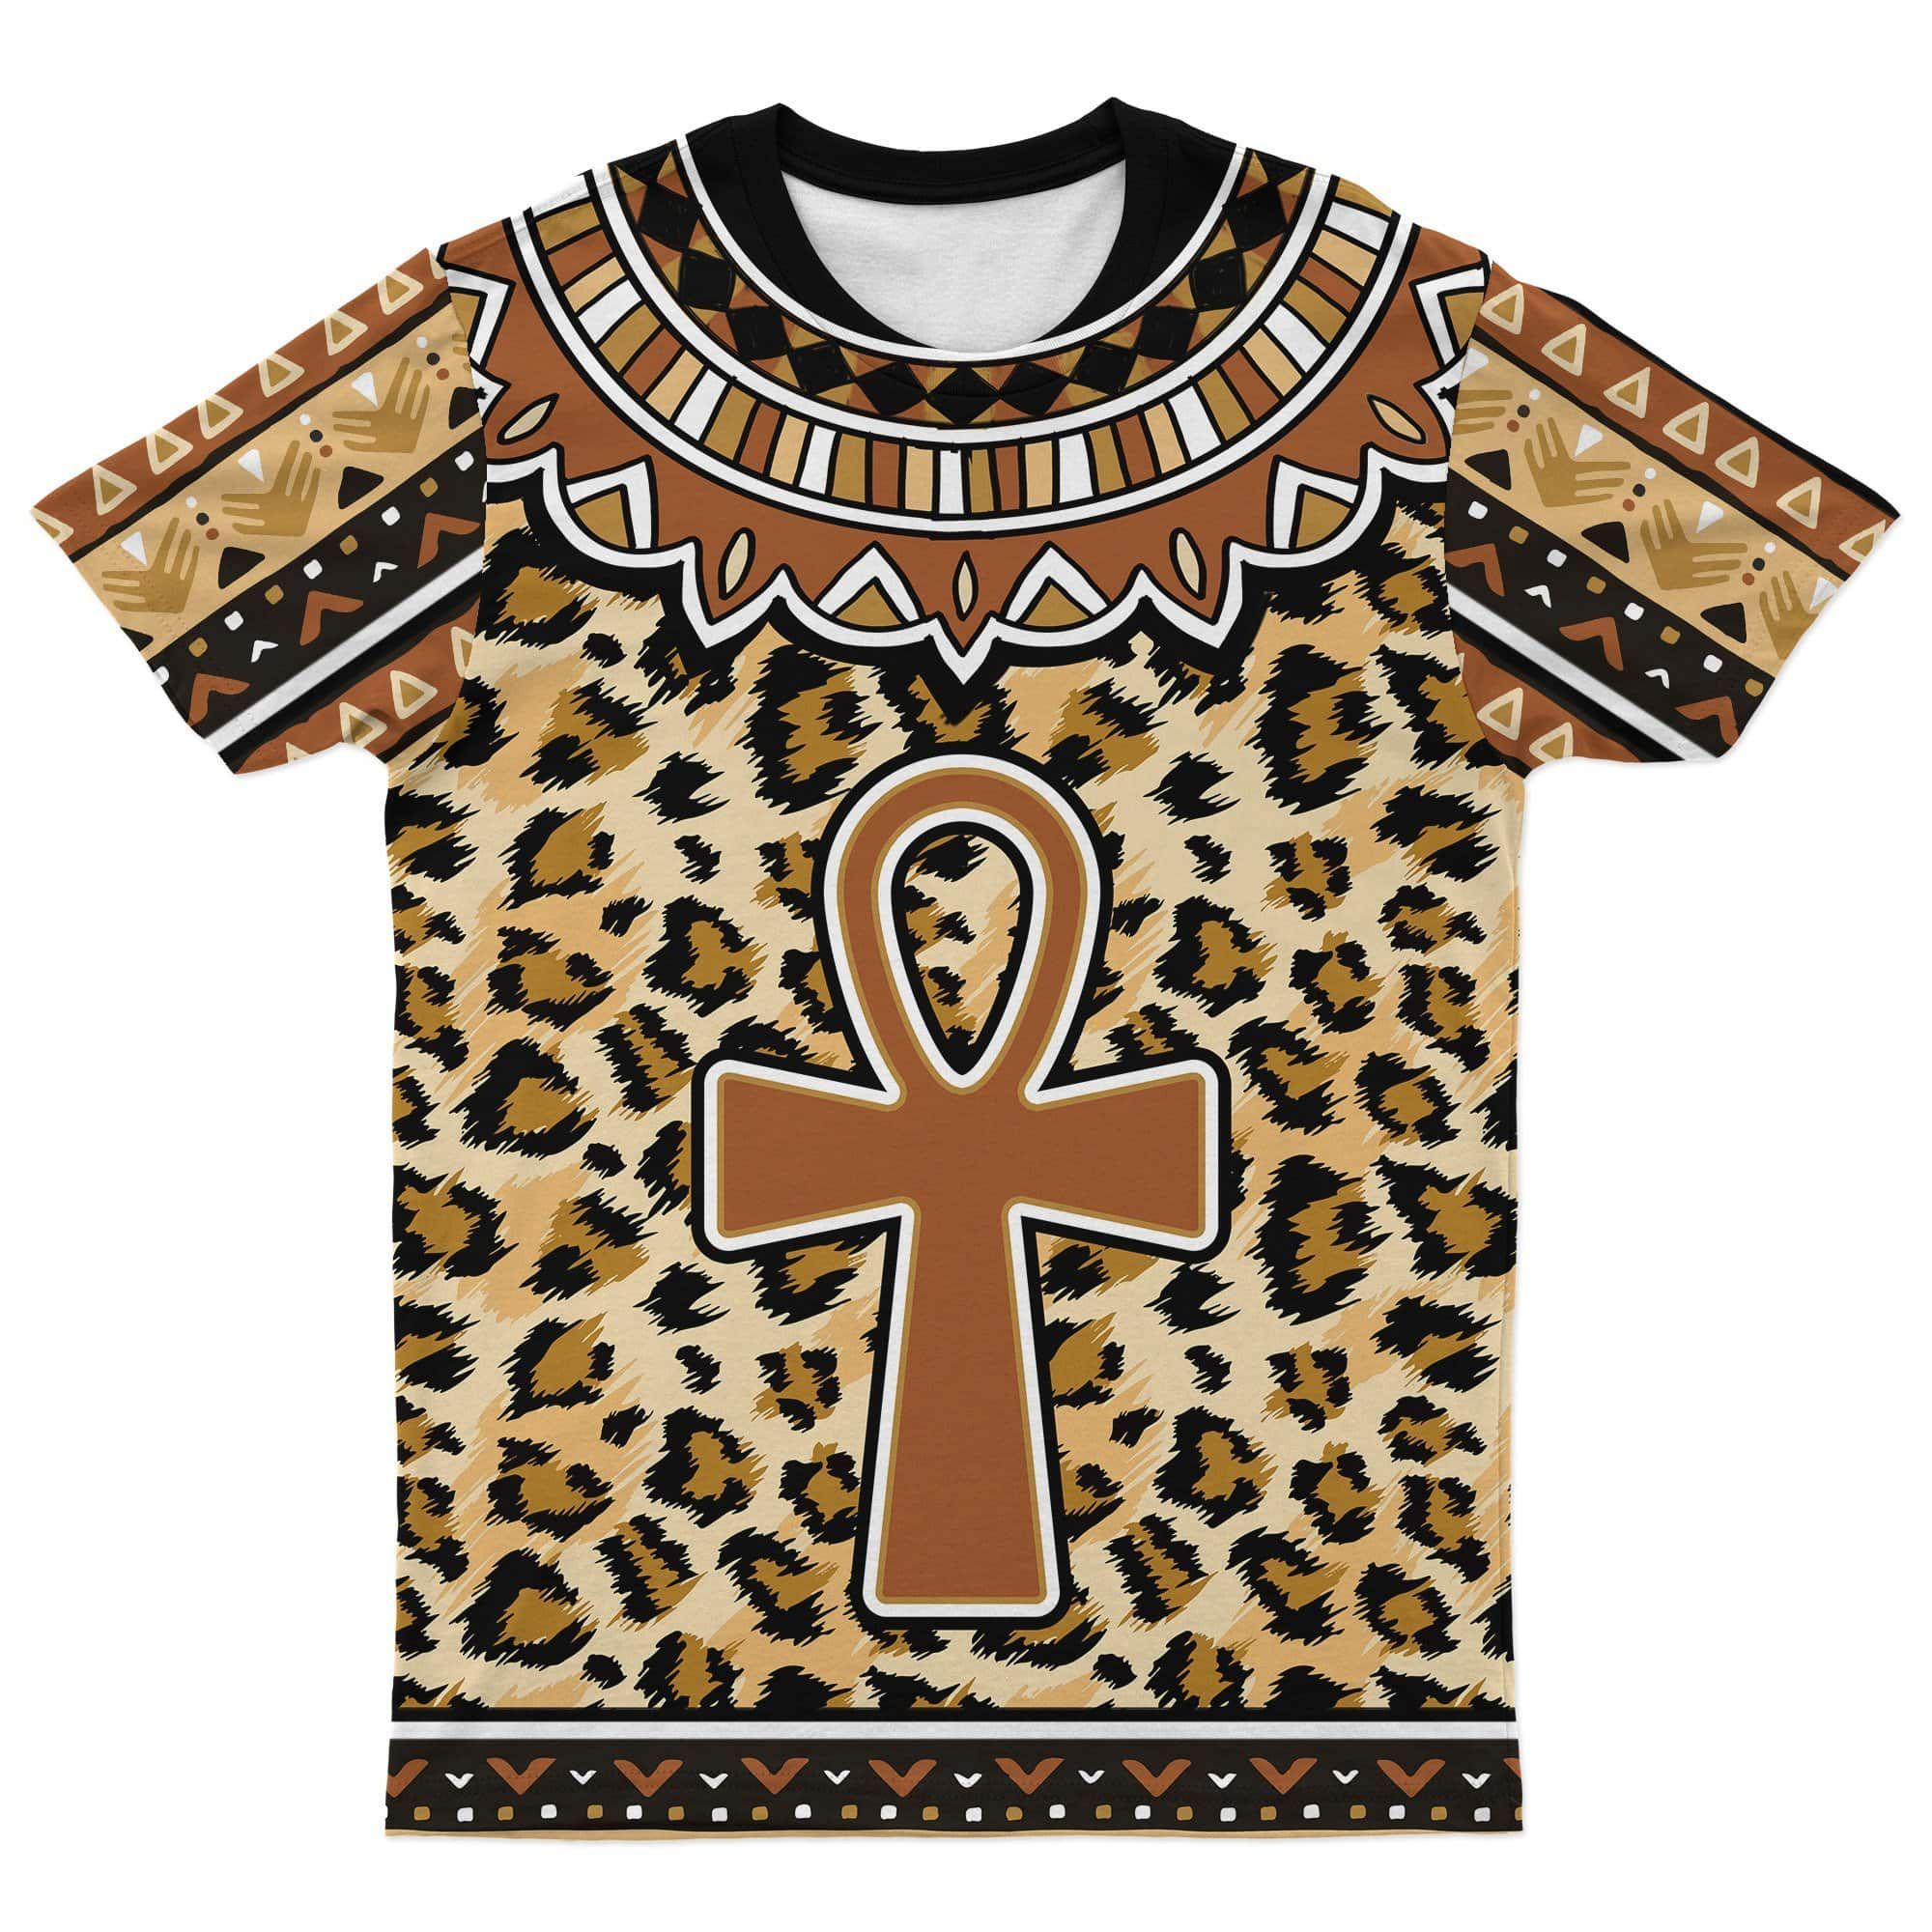 African T-shirt – African Printed Mudcloth Ankh Tee